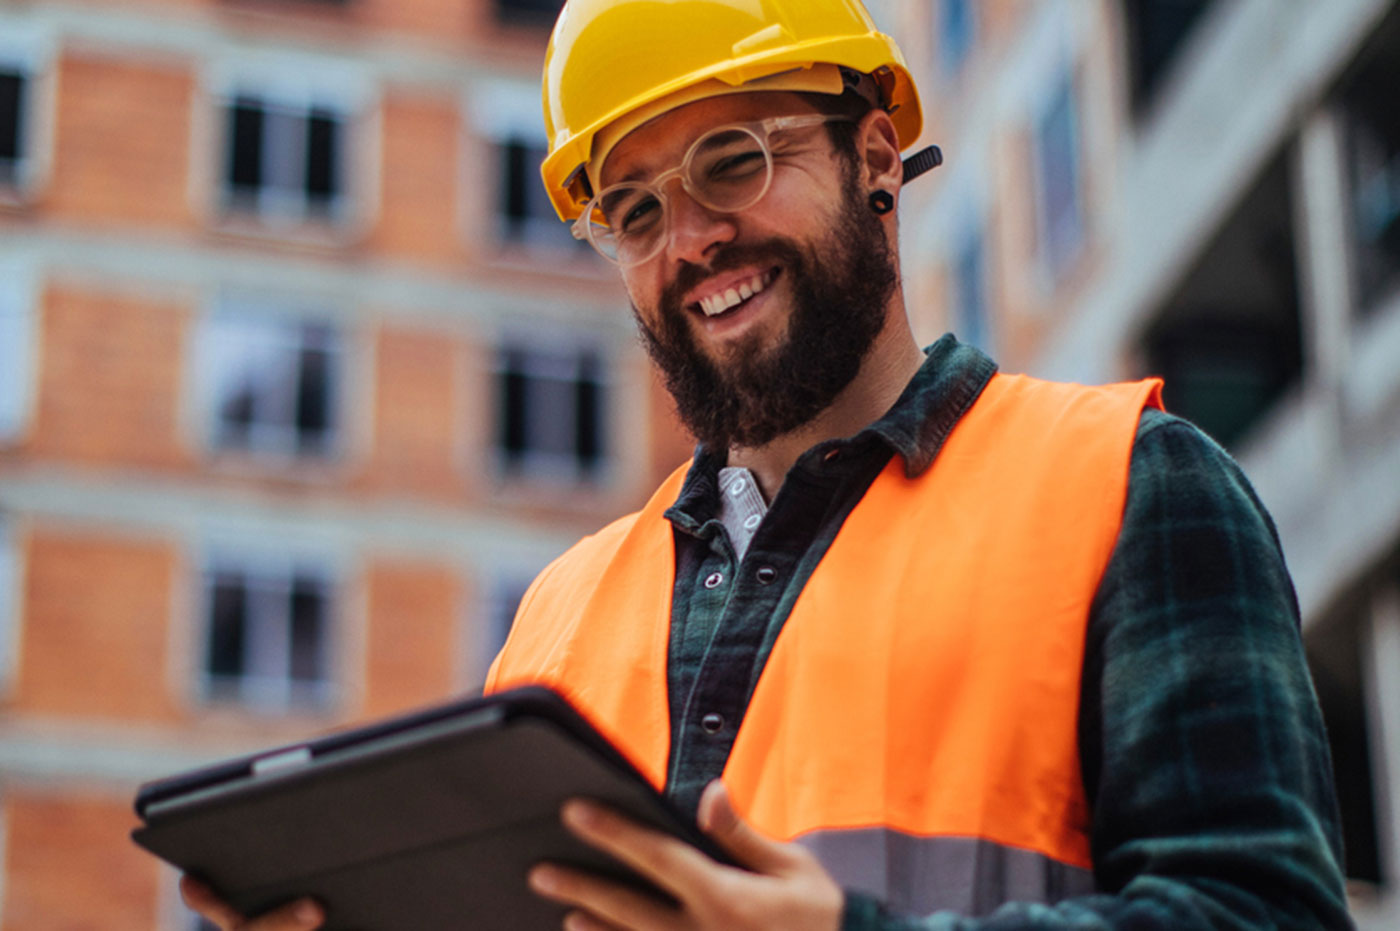 A man in a hard hat, safety vest, and glasses smiling at his tablet while he works.